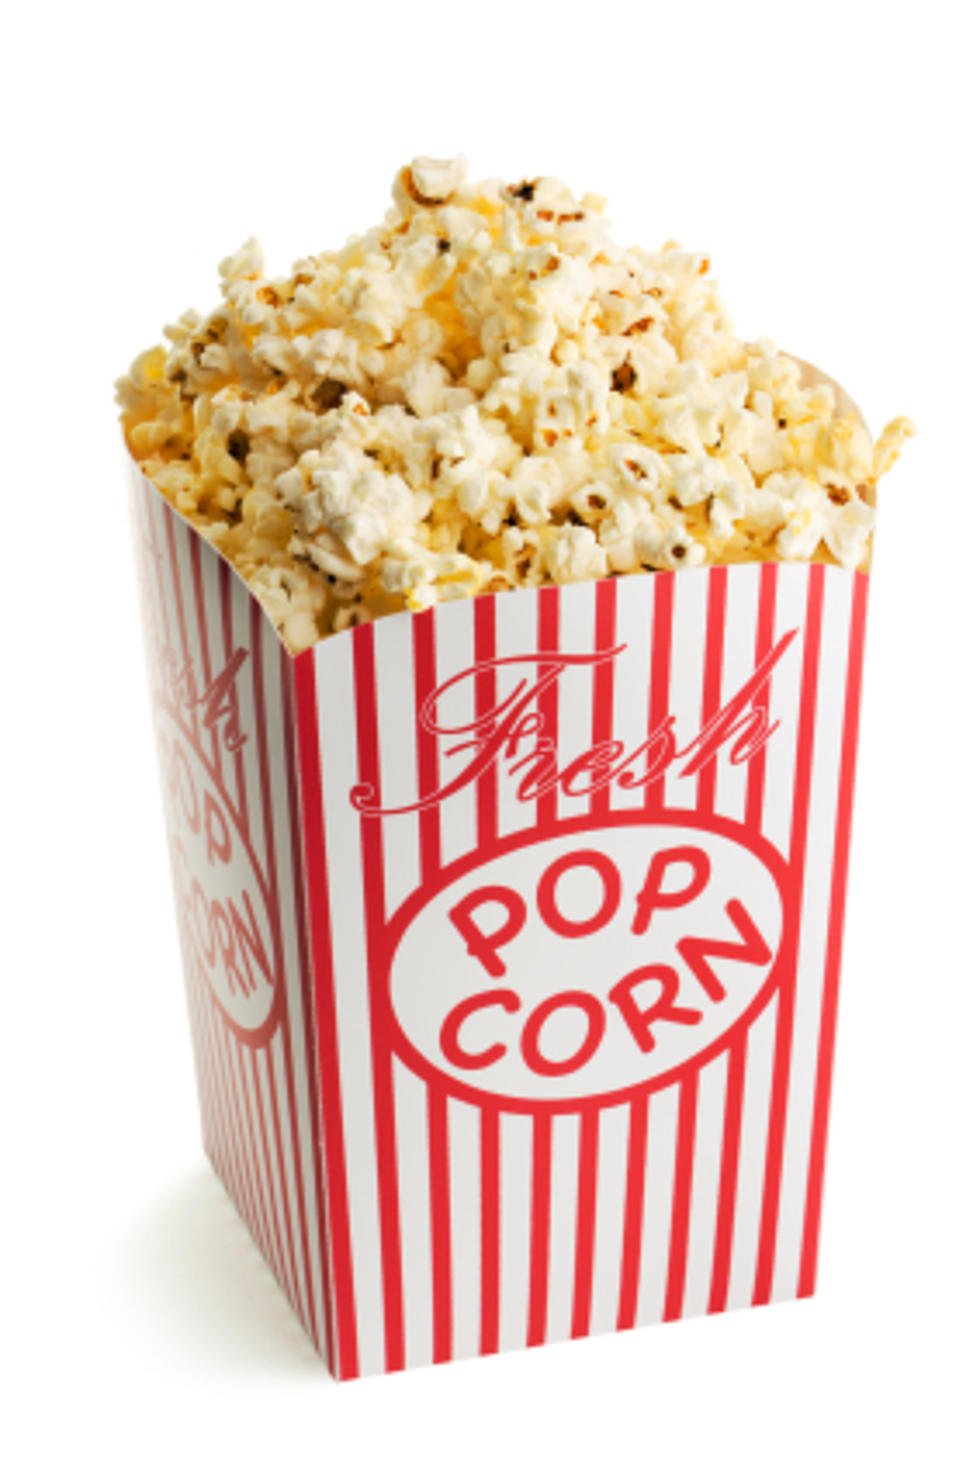 Man Tries to Ban Popcorn from Theaters